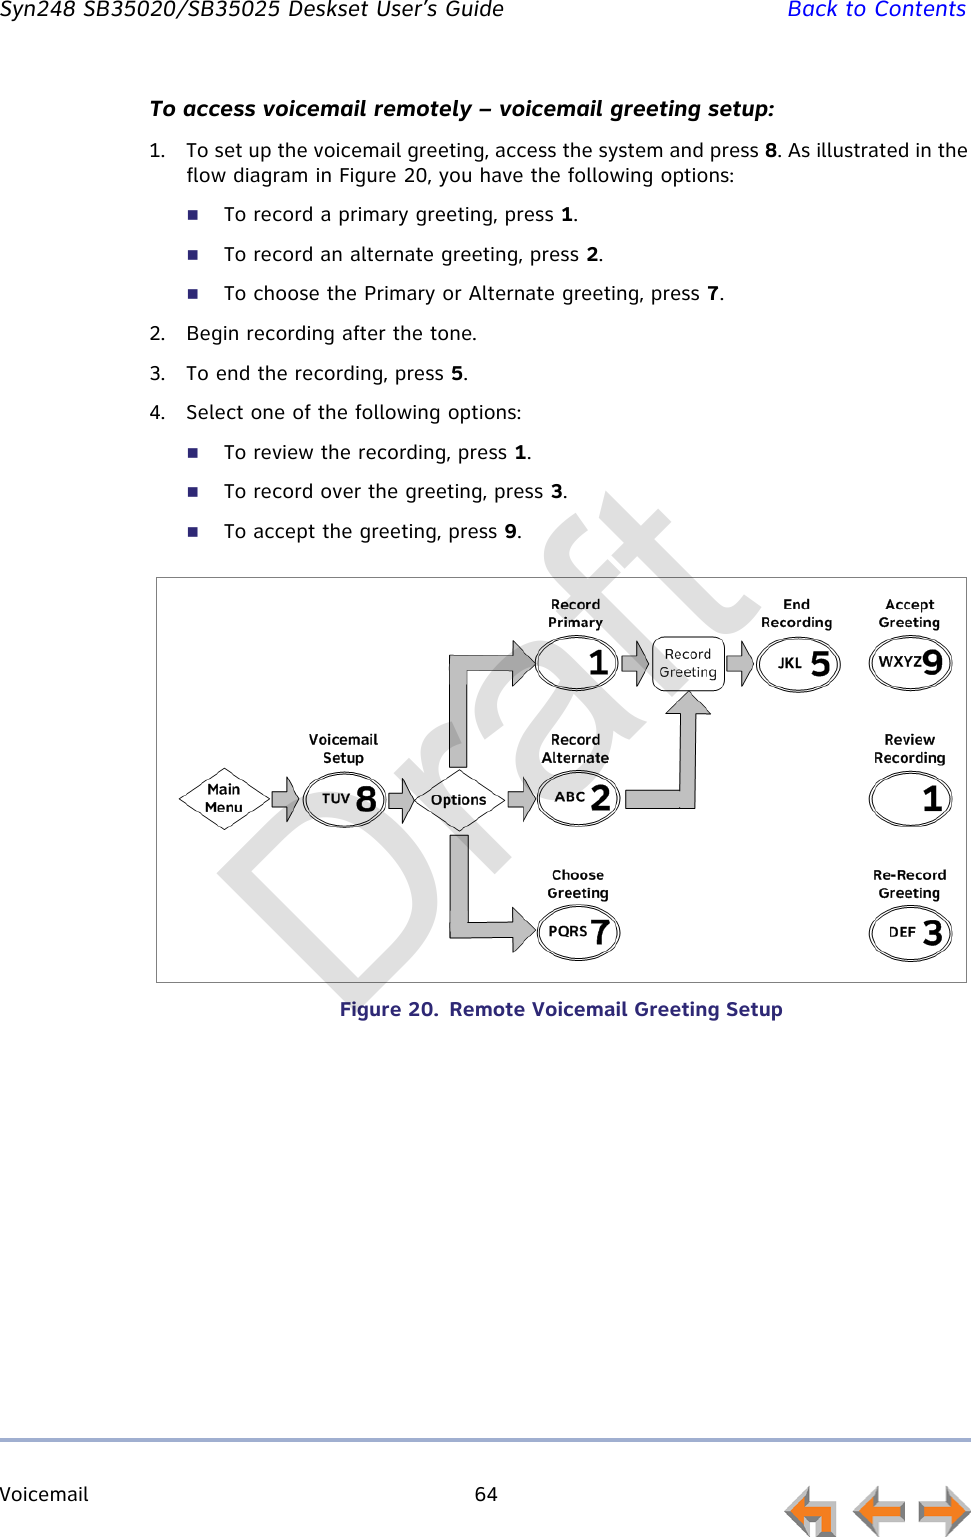 Voicemail 64         Syn248 SB35020/SB35025 Deskset User’s Guide Back to ContentsTo access voicemail remotely – voicemail greeting setup:1. To set up the voicemail greeting, access the system and press 8. As illustrated in the flow diagram in Figure 20, you have the following options:To record a primary greeting, press 1.To record an alternate greeting, press 2.To choose the Primary or Alternate greeting, press 7.2. Begin recording after the tone.3. To end the recording, press 5.4. Select one of the following options:To review the recording, press 1.To record over the greeting, press 3.To accept the greeting, press 9.Figure 20.  Remote Voicemail Greeting SetupDraft